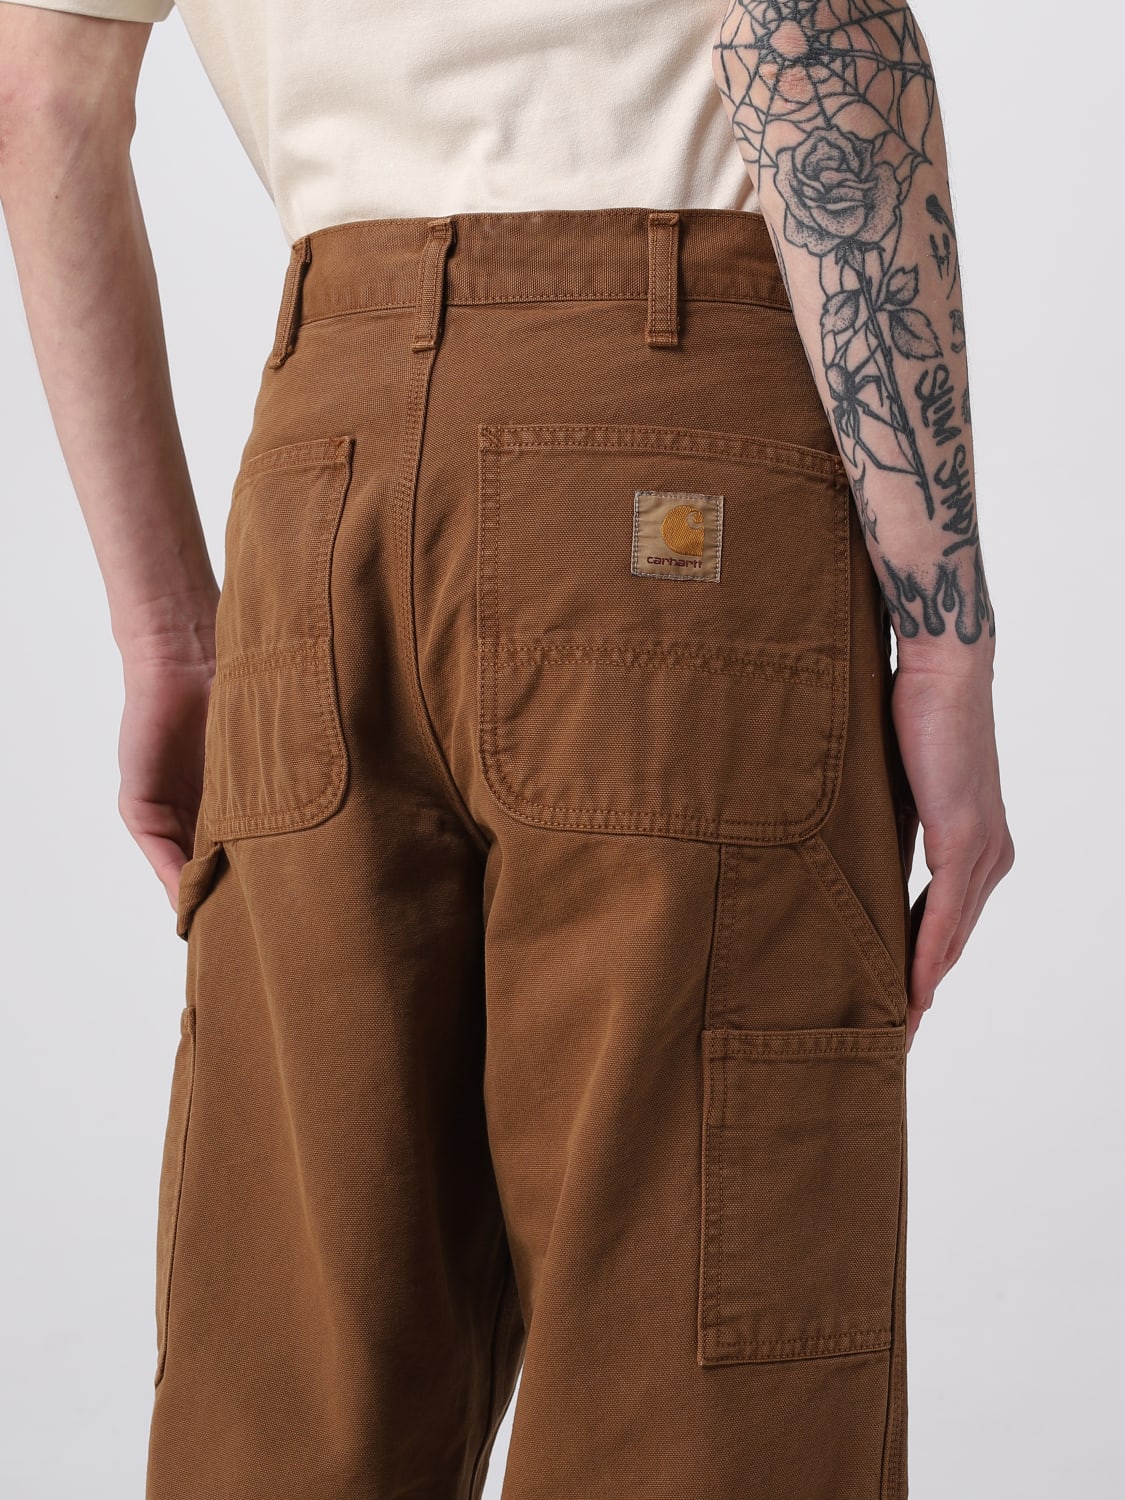 CARHARTT WIP: jeans for man - Earth | Carhartt Wip jeans I029196 online GIGLIO.COM